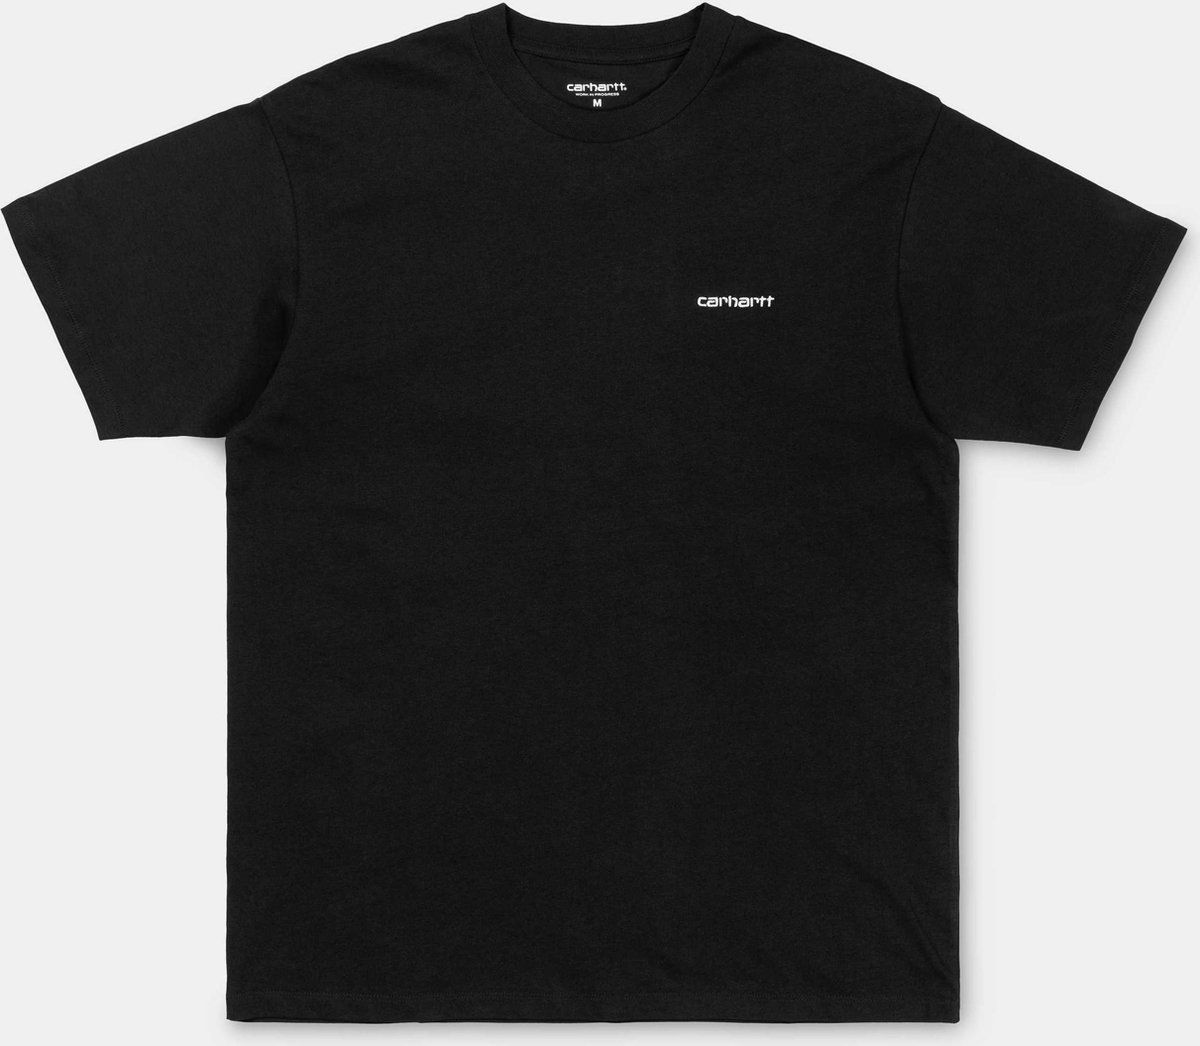 Carhartt S/S Scriot Embroidery T-Shirt maat XS